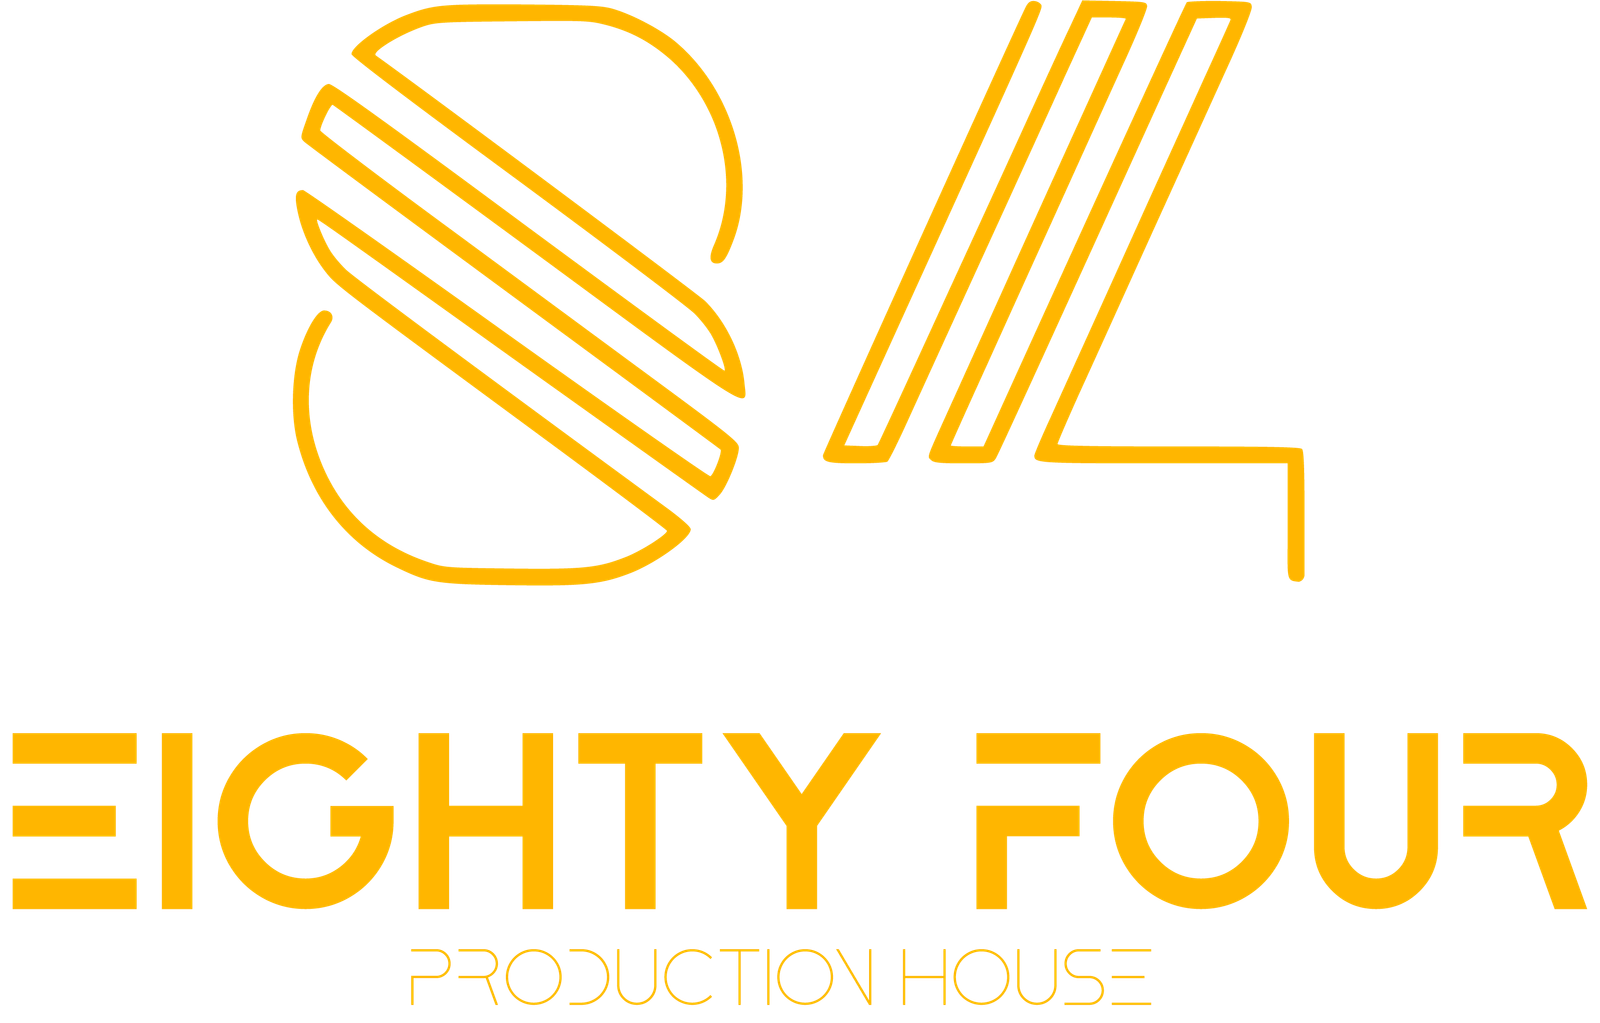 84 production house